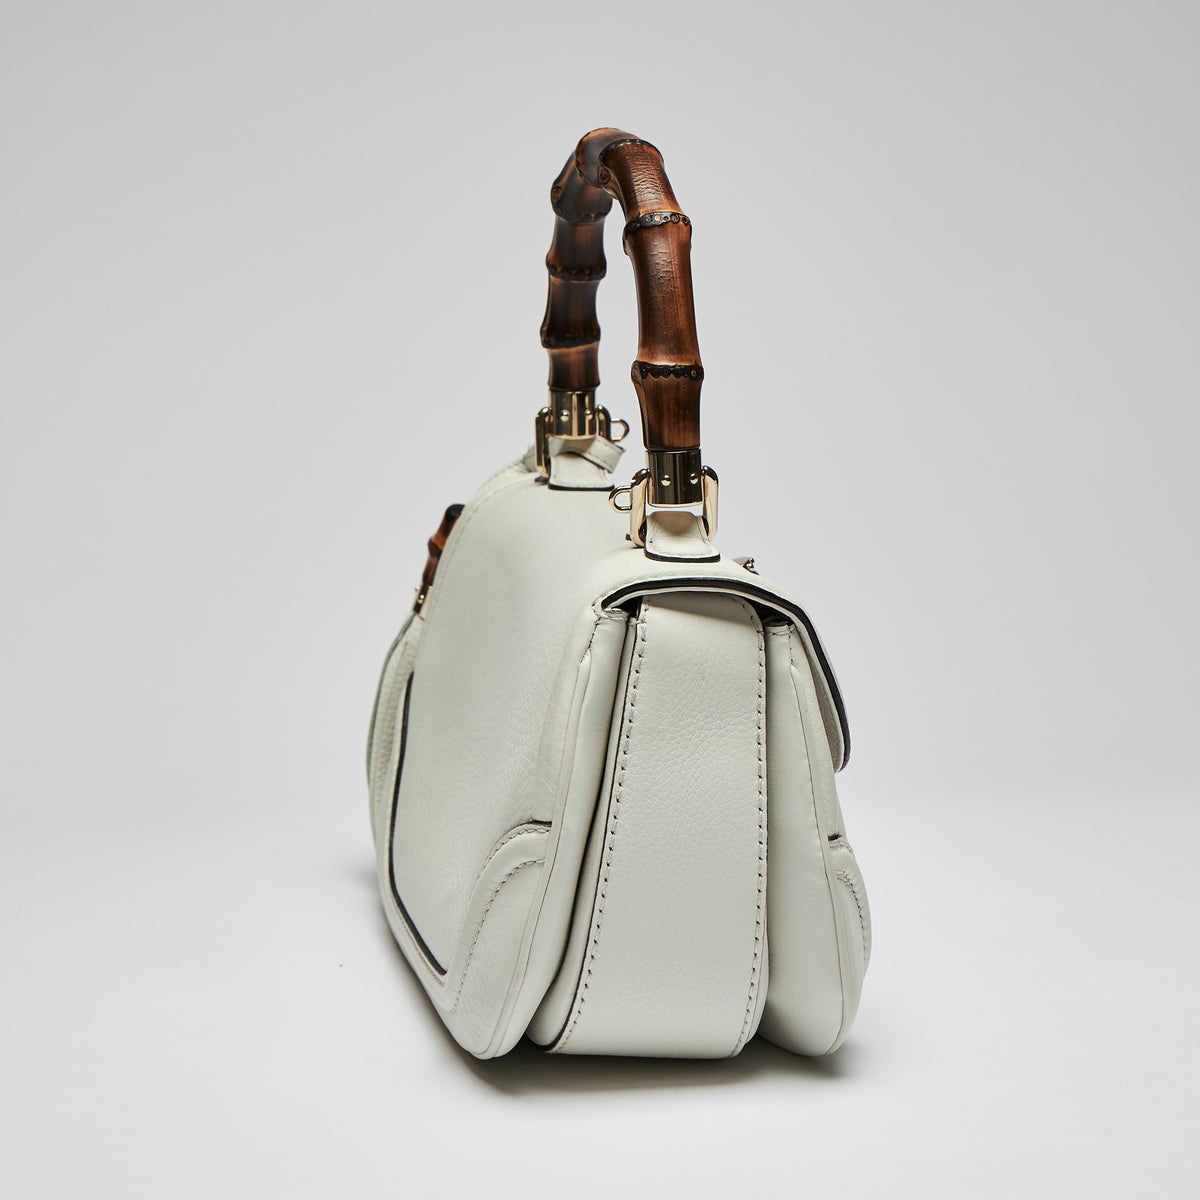 Excellent Pre-Loved Ivory Grained Leather Bamboo Top Handle Bag with Removable Shoulder Strap(side)